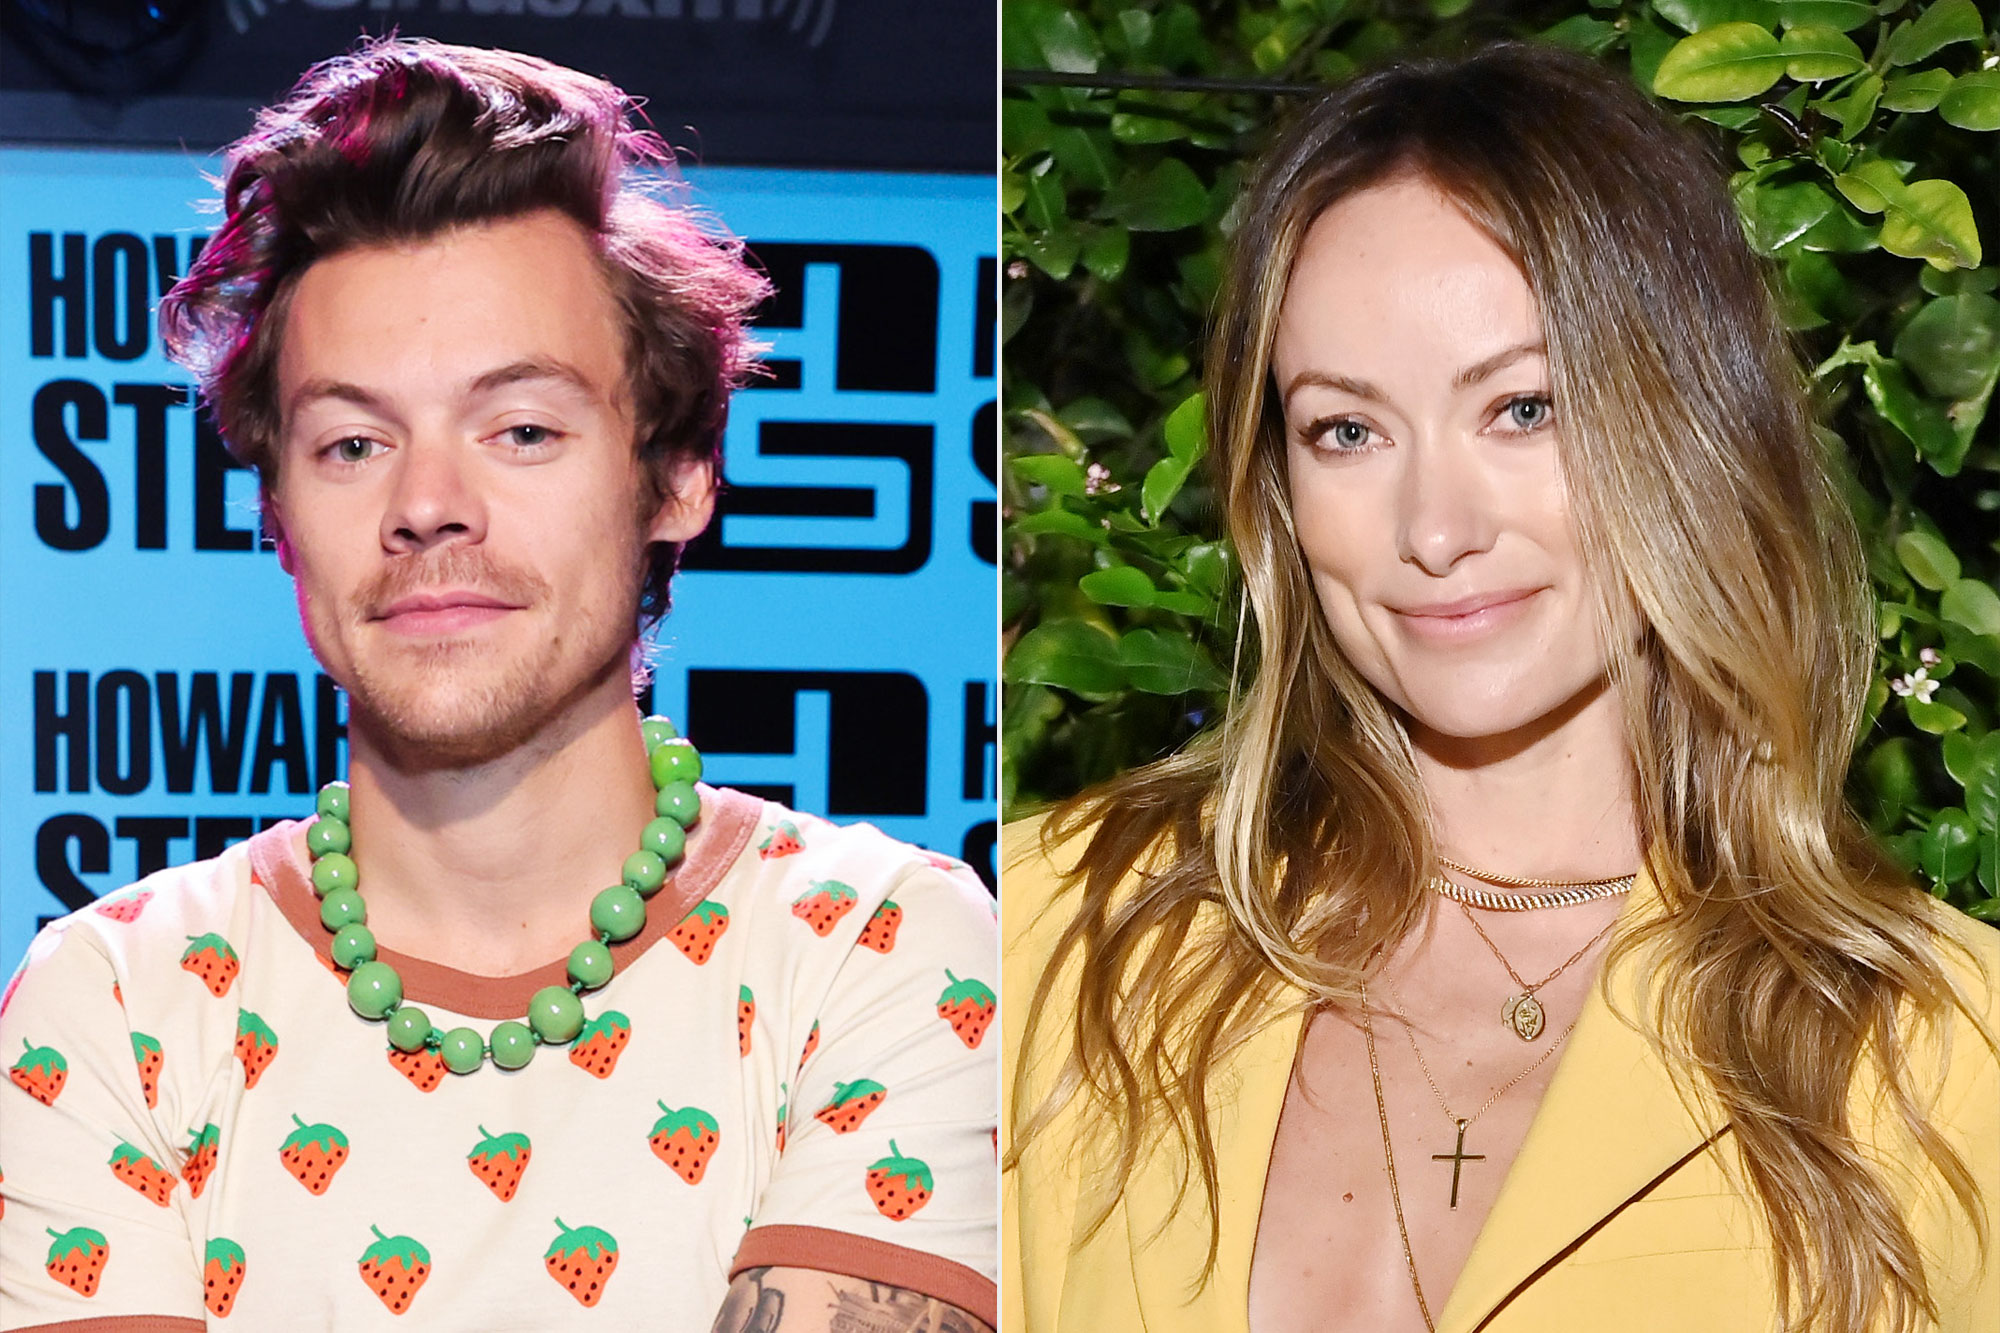 Harry Styles & Olivia Wilde Call Out “Toxic Negativity” Aimed At Their Relationship